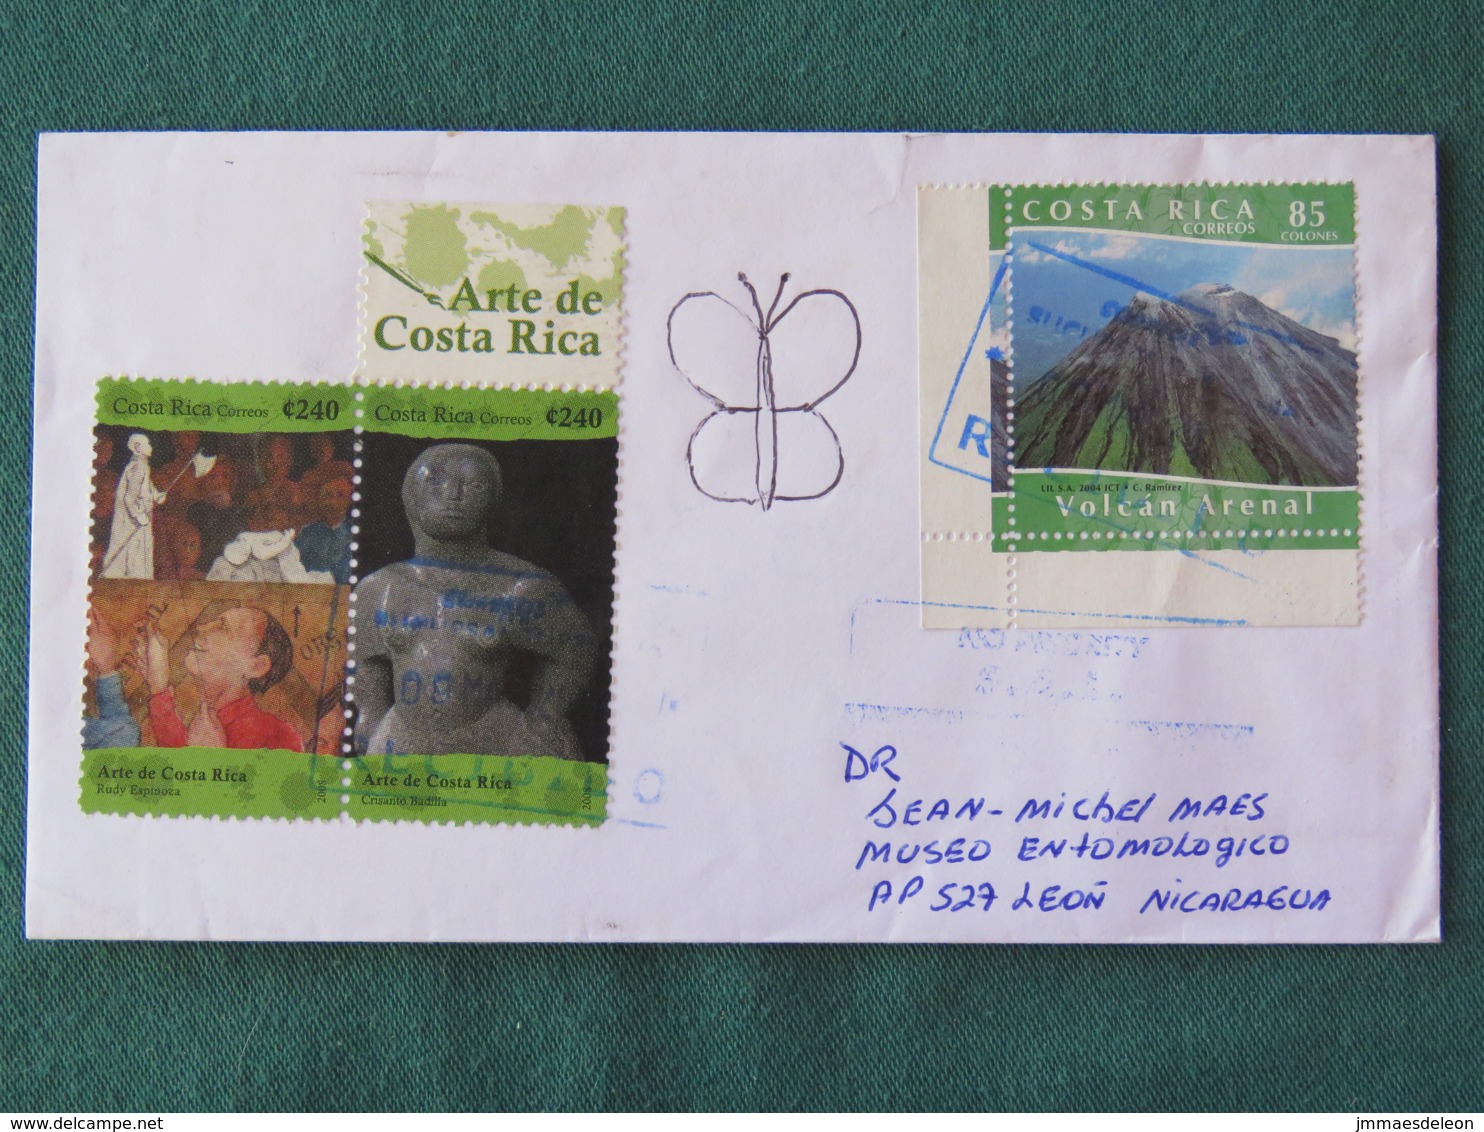 Costa Rica 2017 Cover To Nicaragua - Volcano - Art Sculpture Painting - Costa Rica